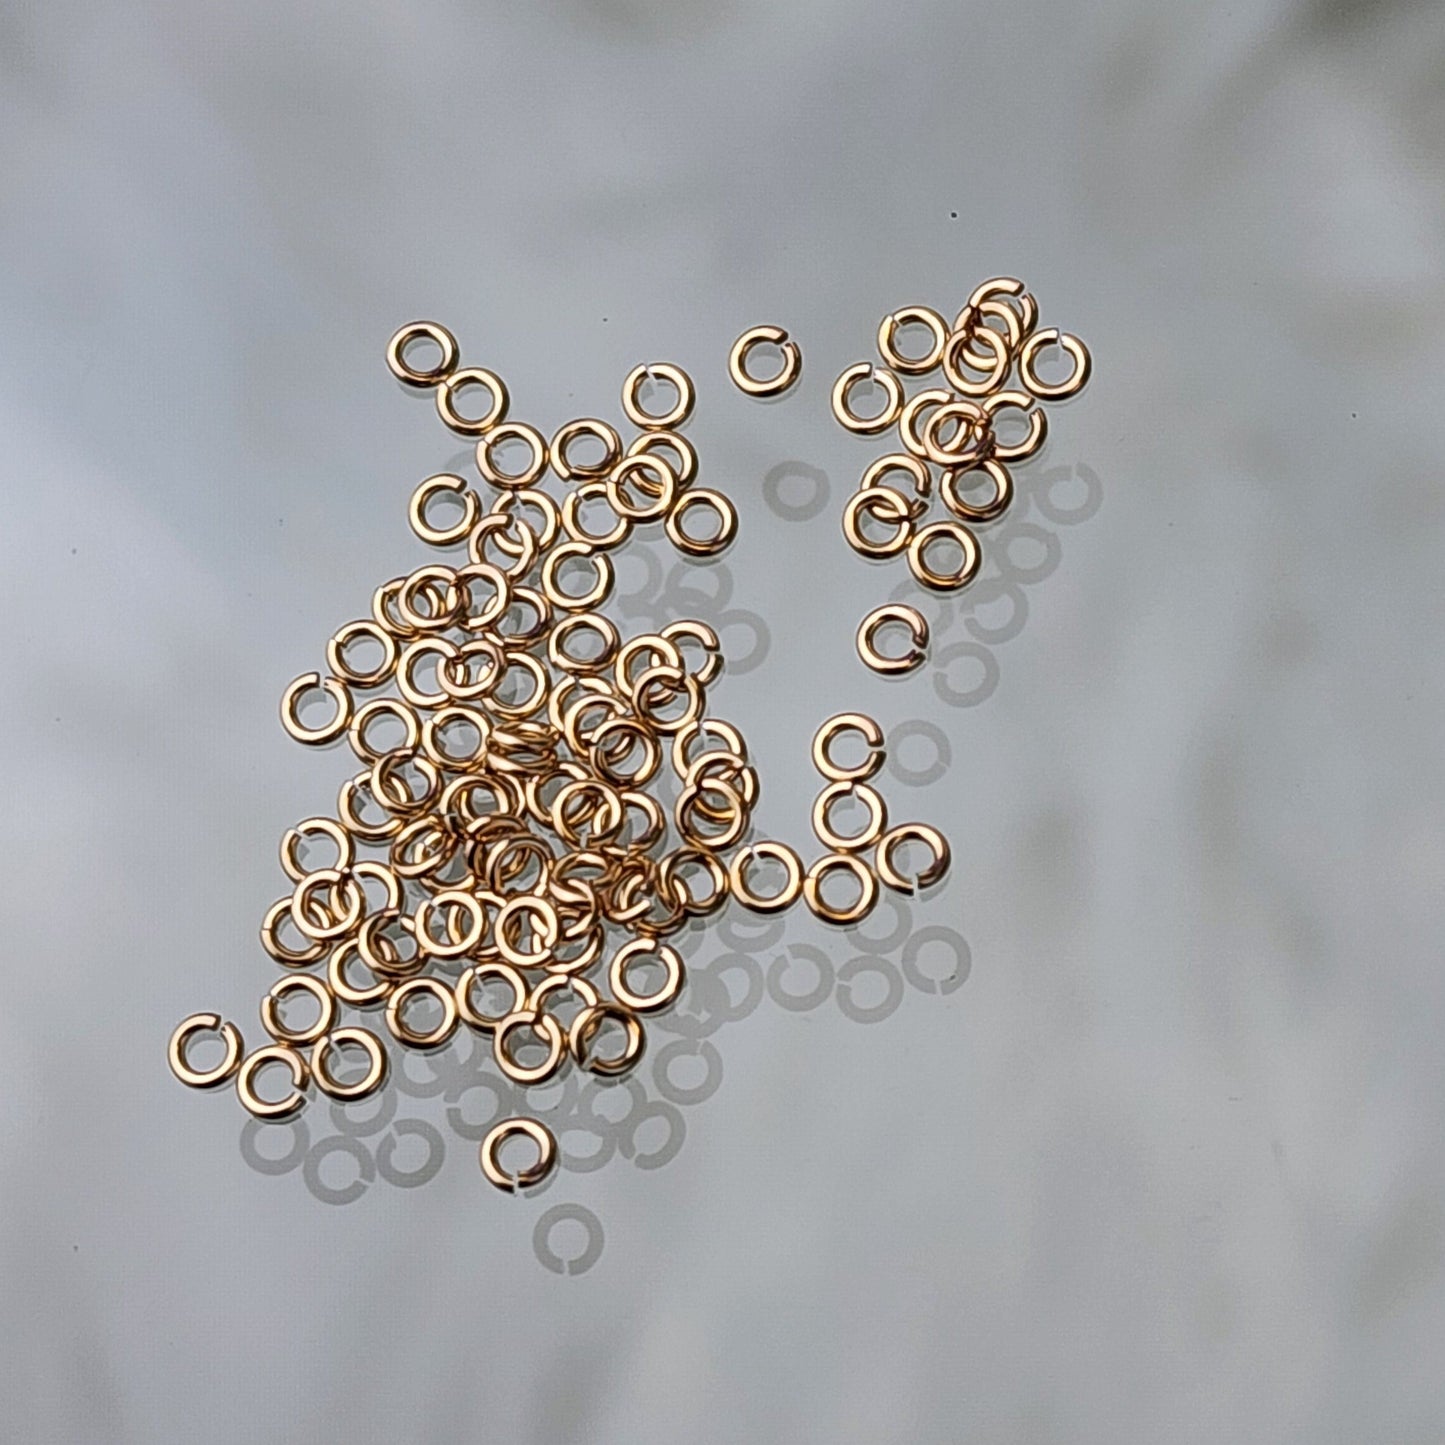 2.3 mm 24 gauge Jumprings Gold filled and Sterling silver Pack of 50